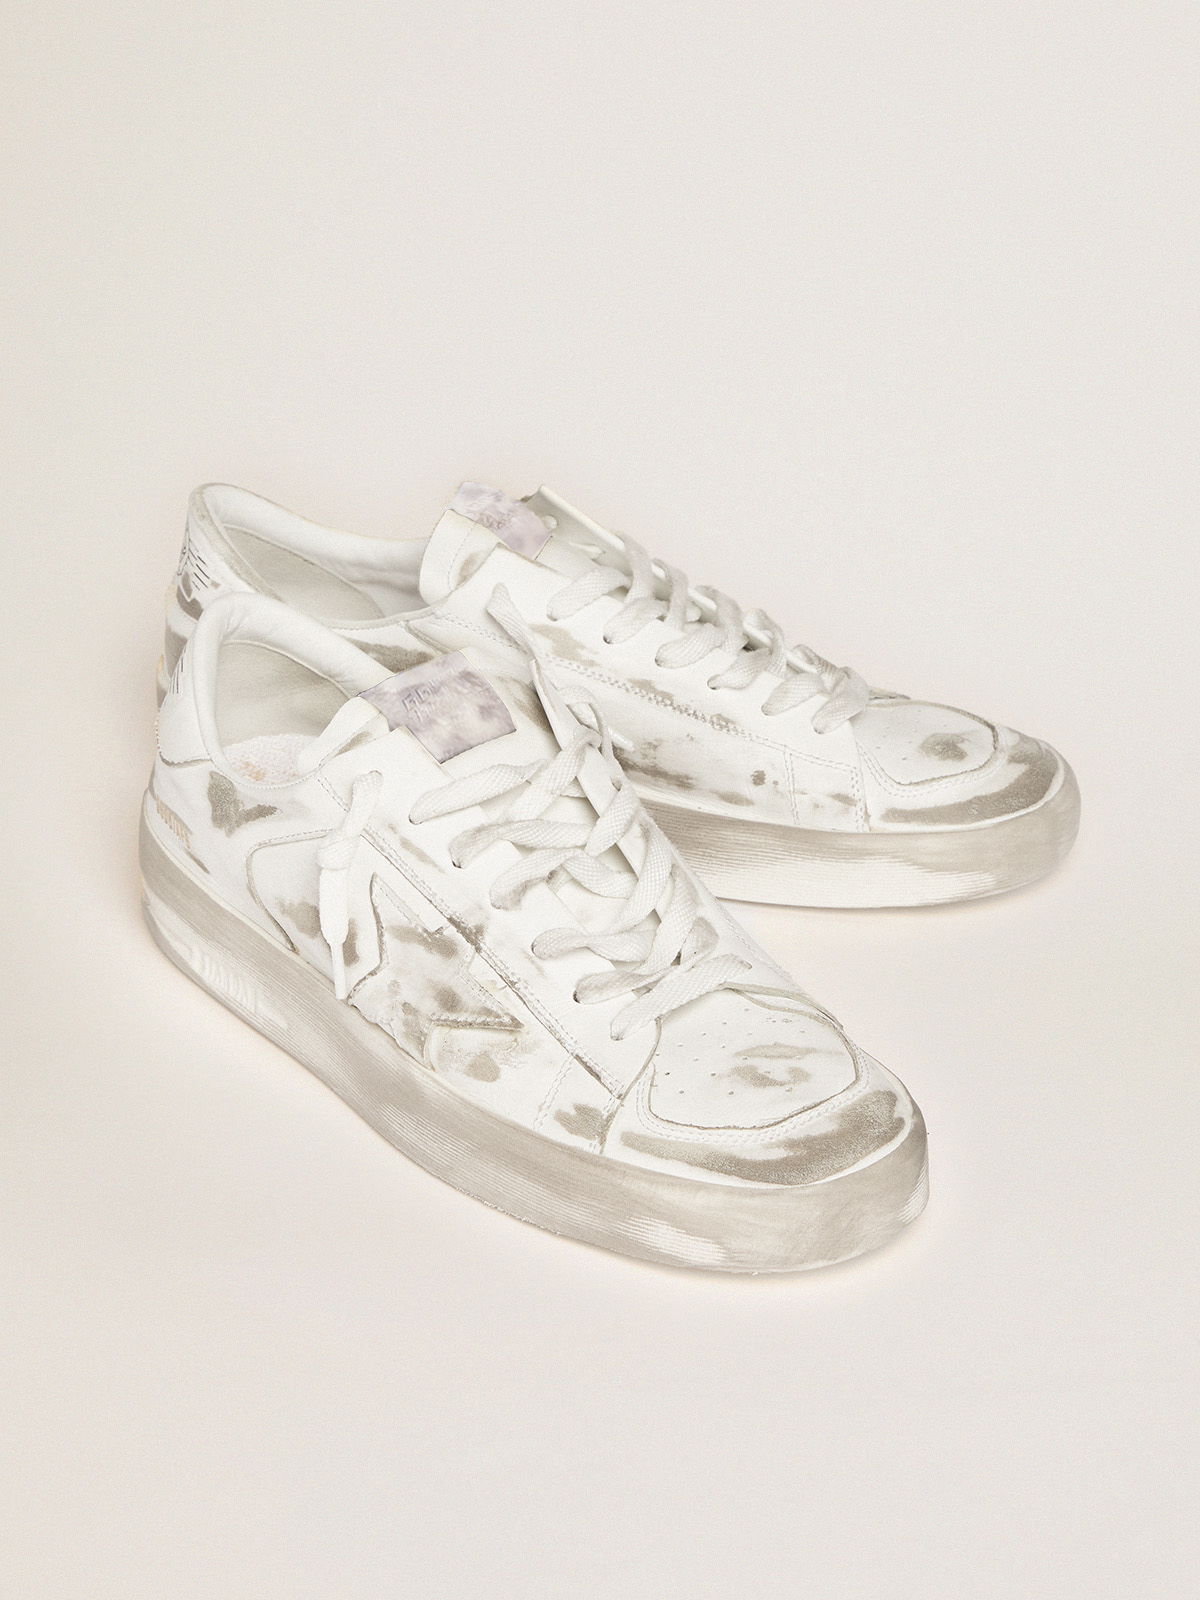 Stardan sneakers in white leather with lived-in treatment | Golden 